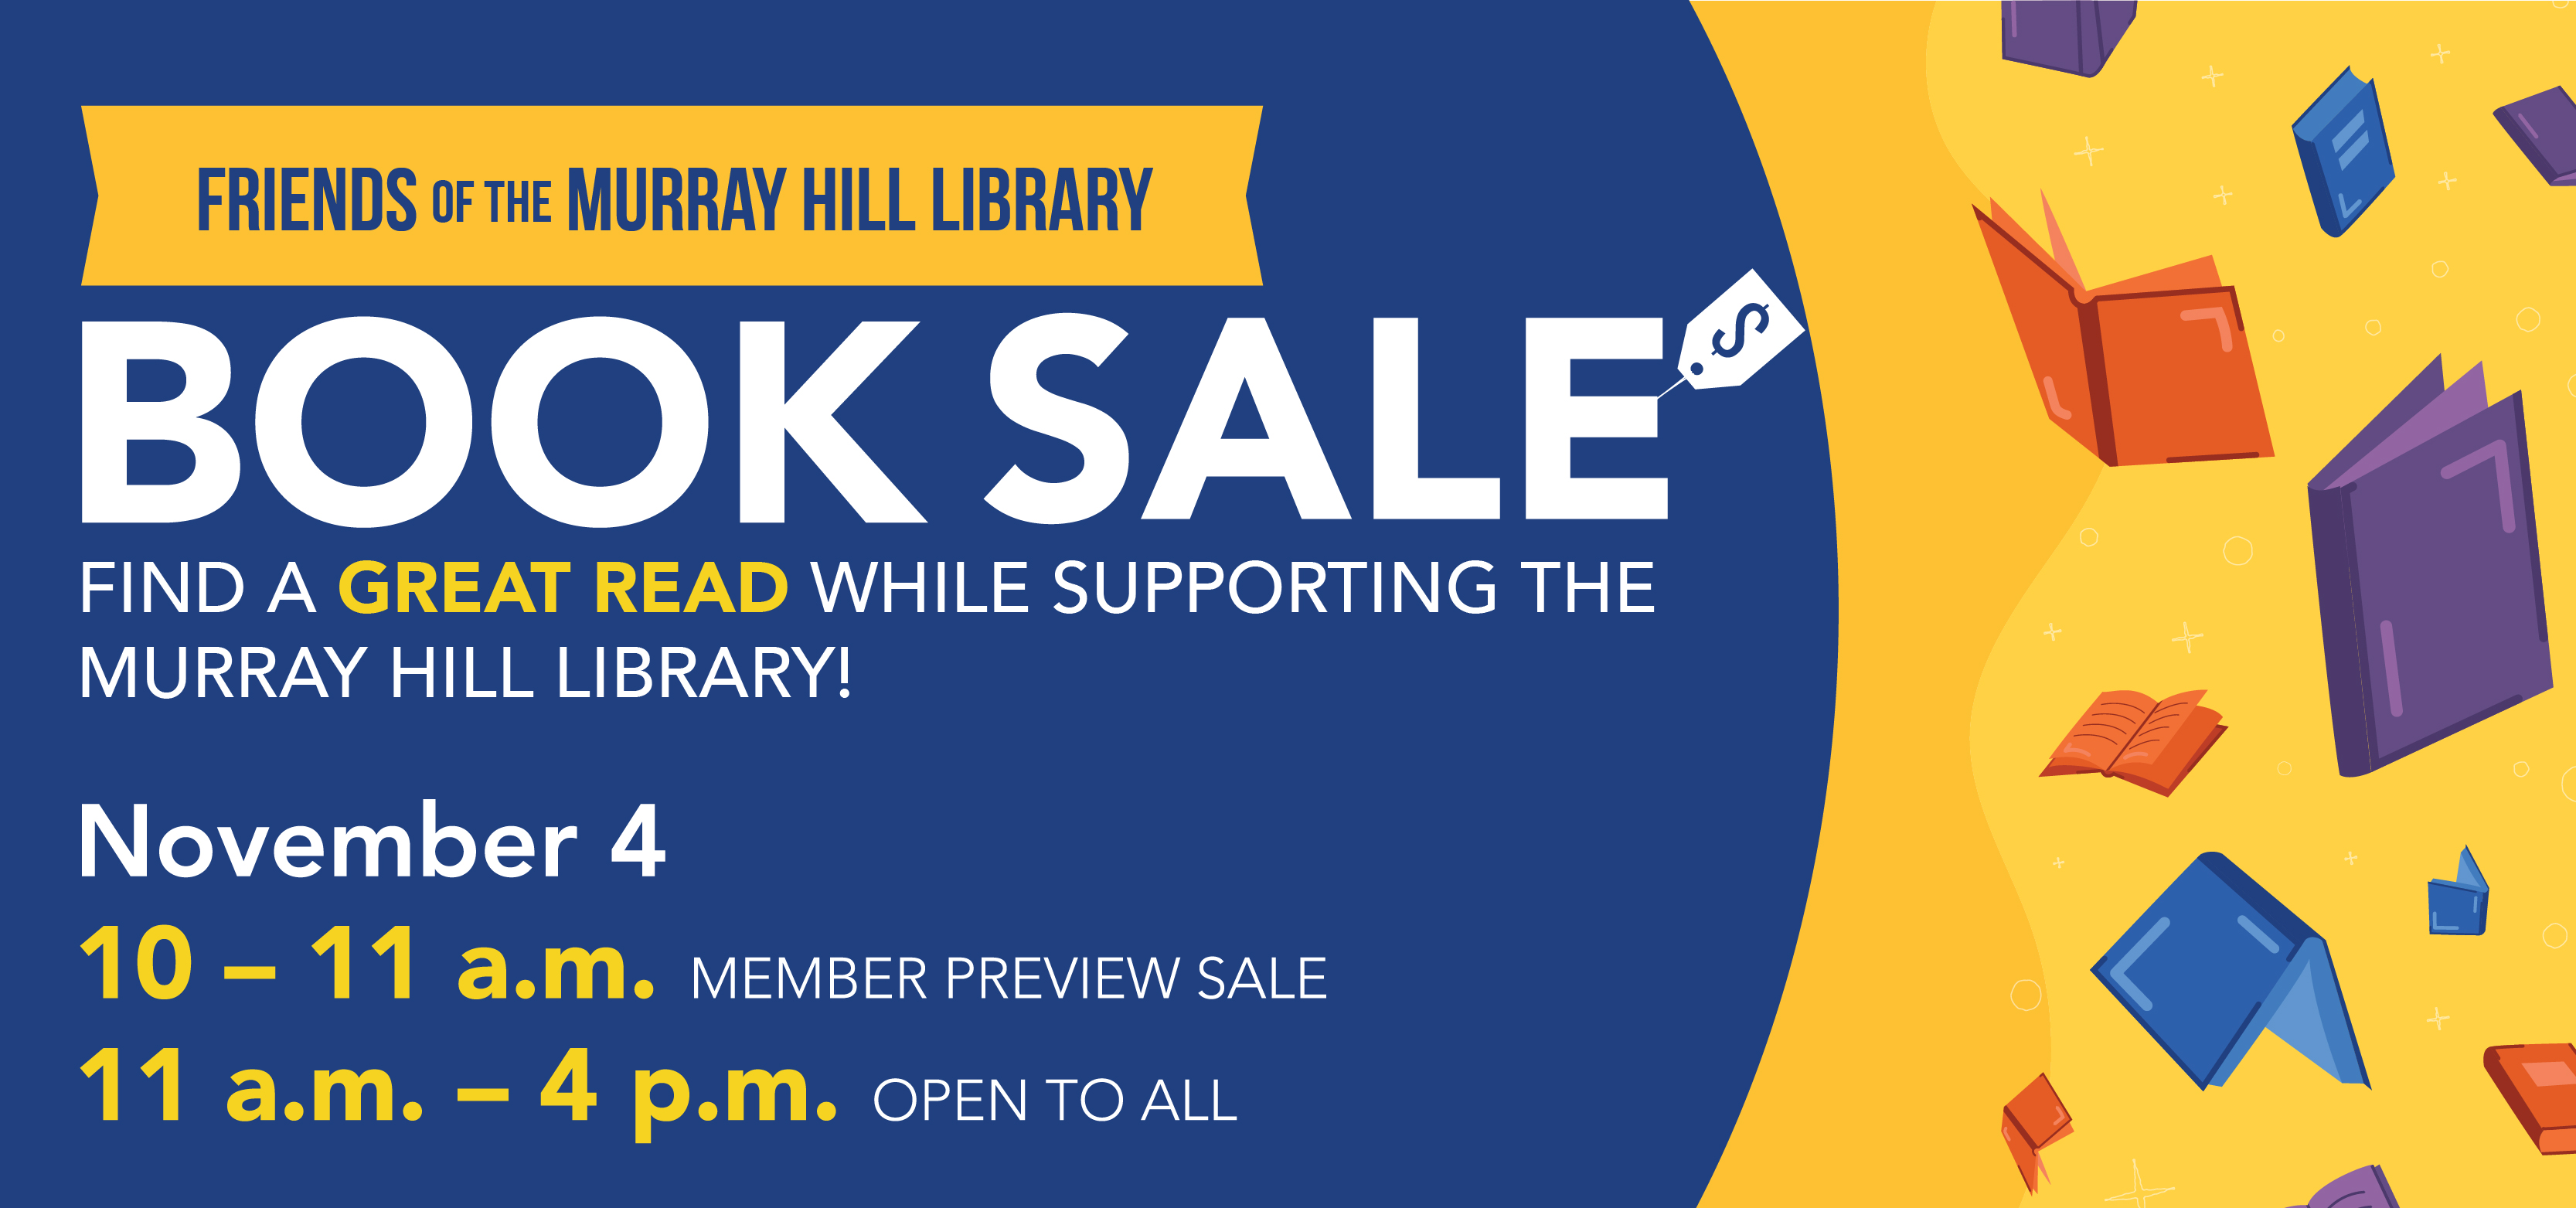 Friends of the Murray Hill Library book sale on Saturday, November 4, from 10 am to 4 pm. Members preview hour is 10 am to 11 am